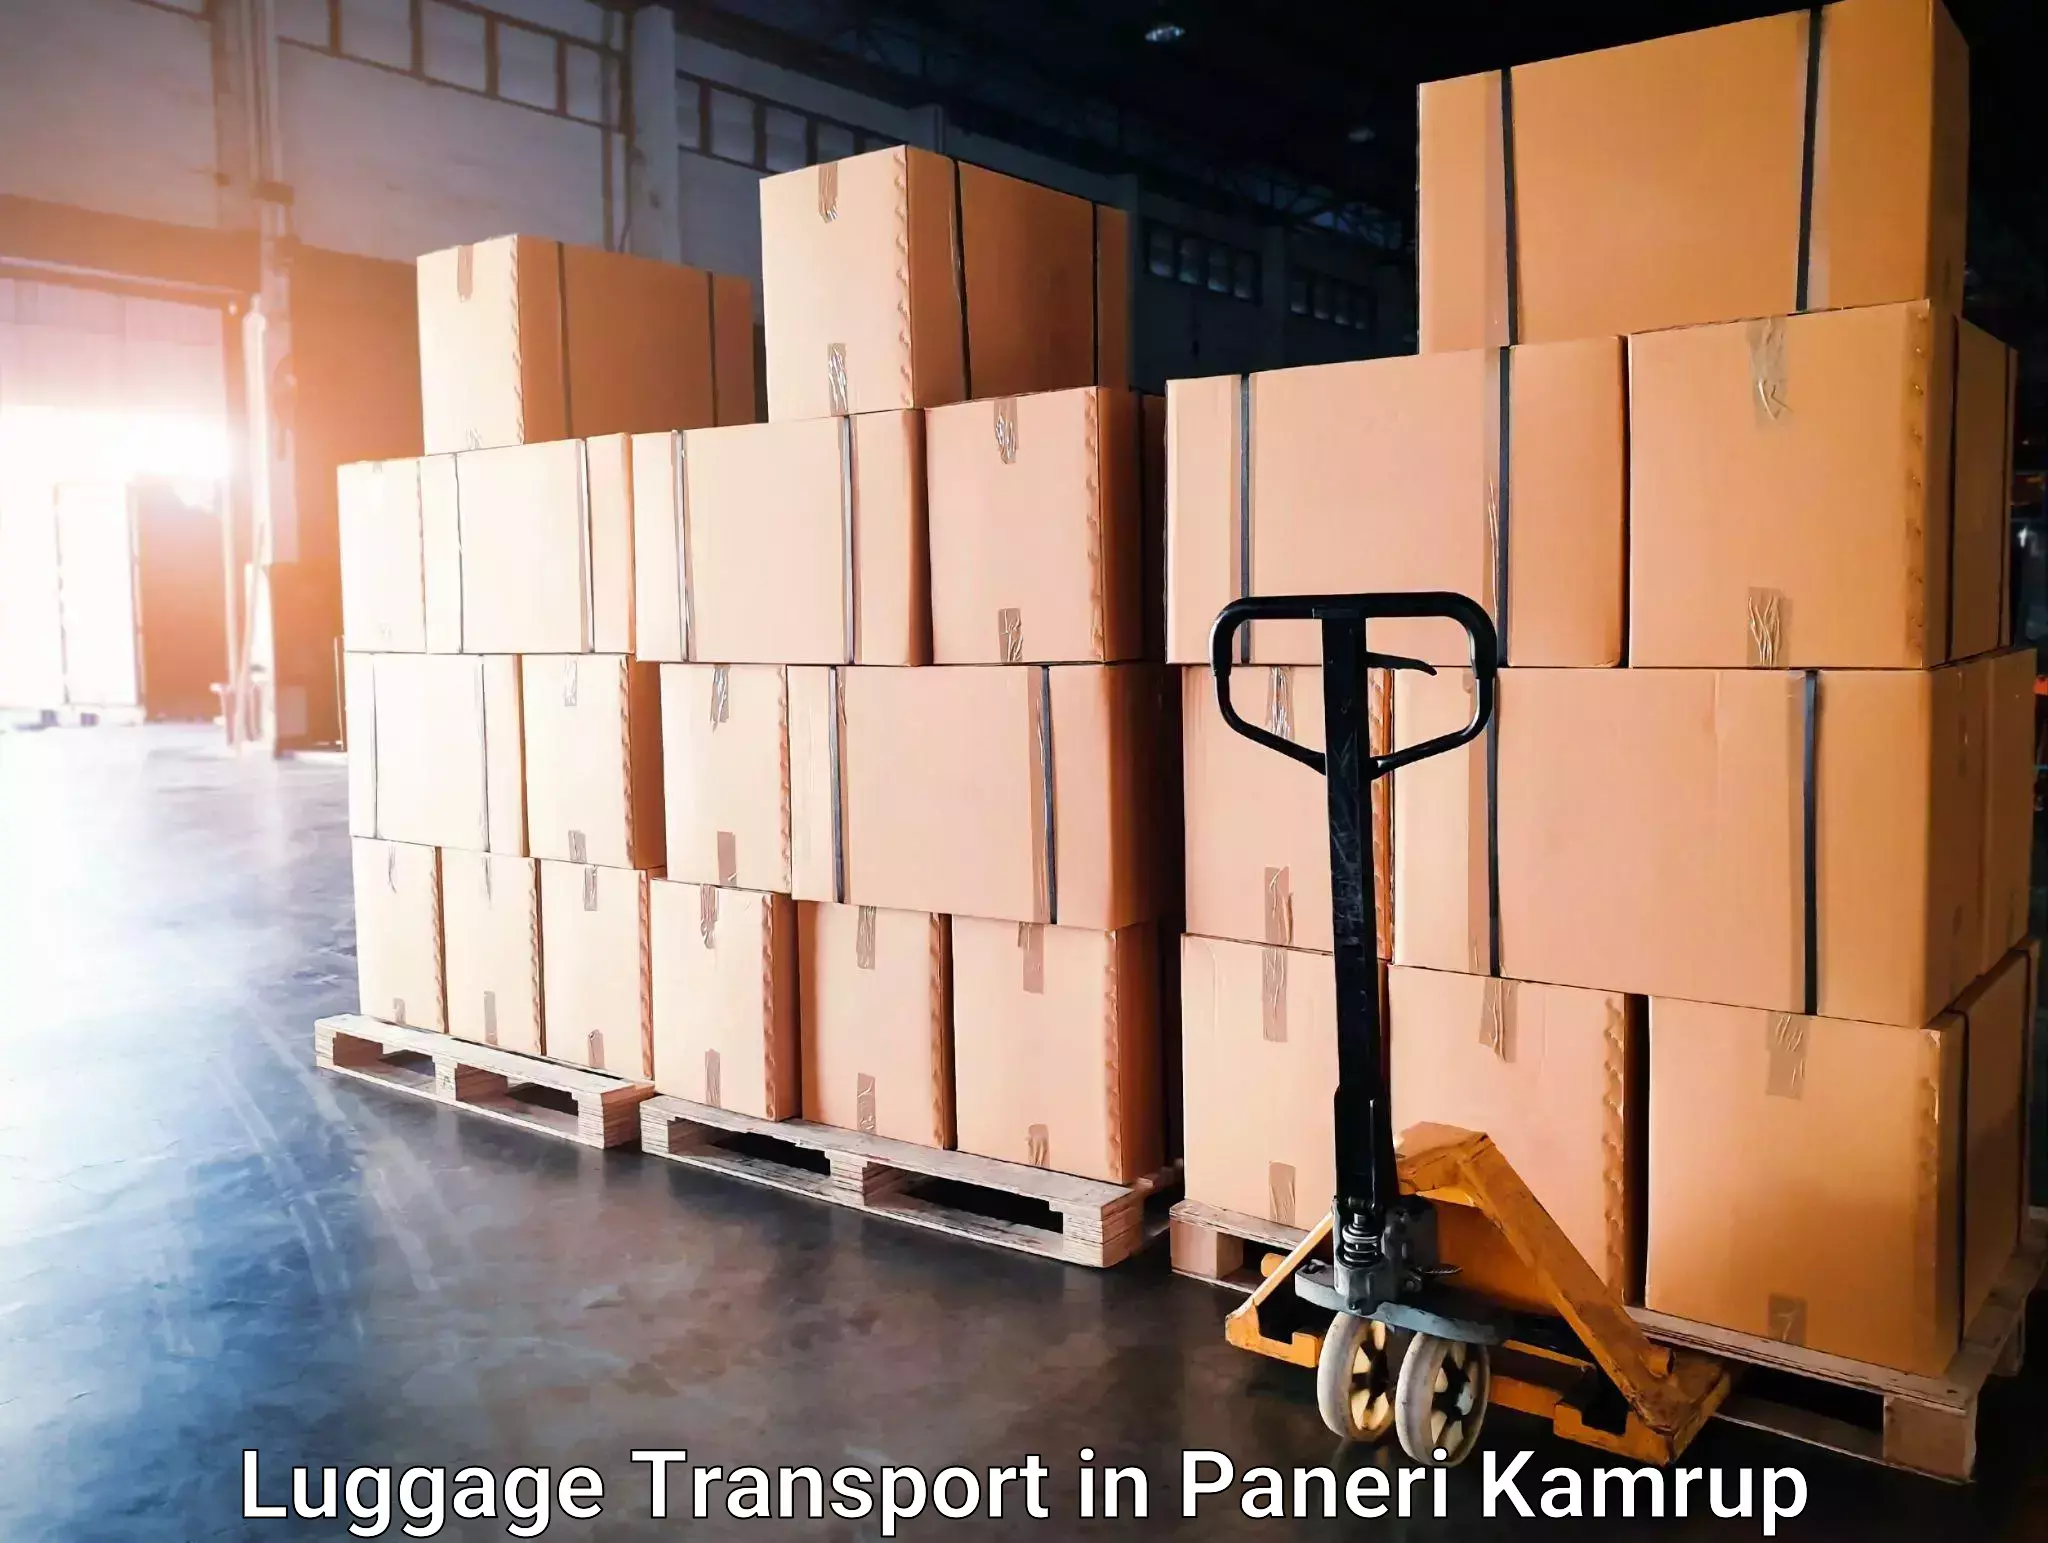 Luggage transport consulting in Paneri Kamrup